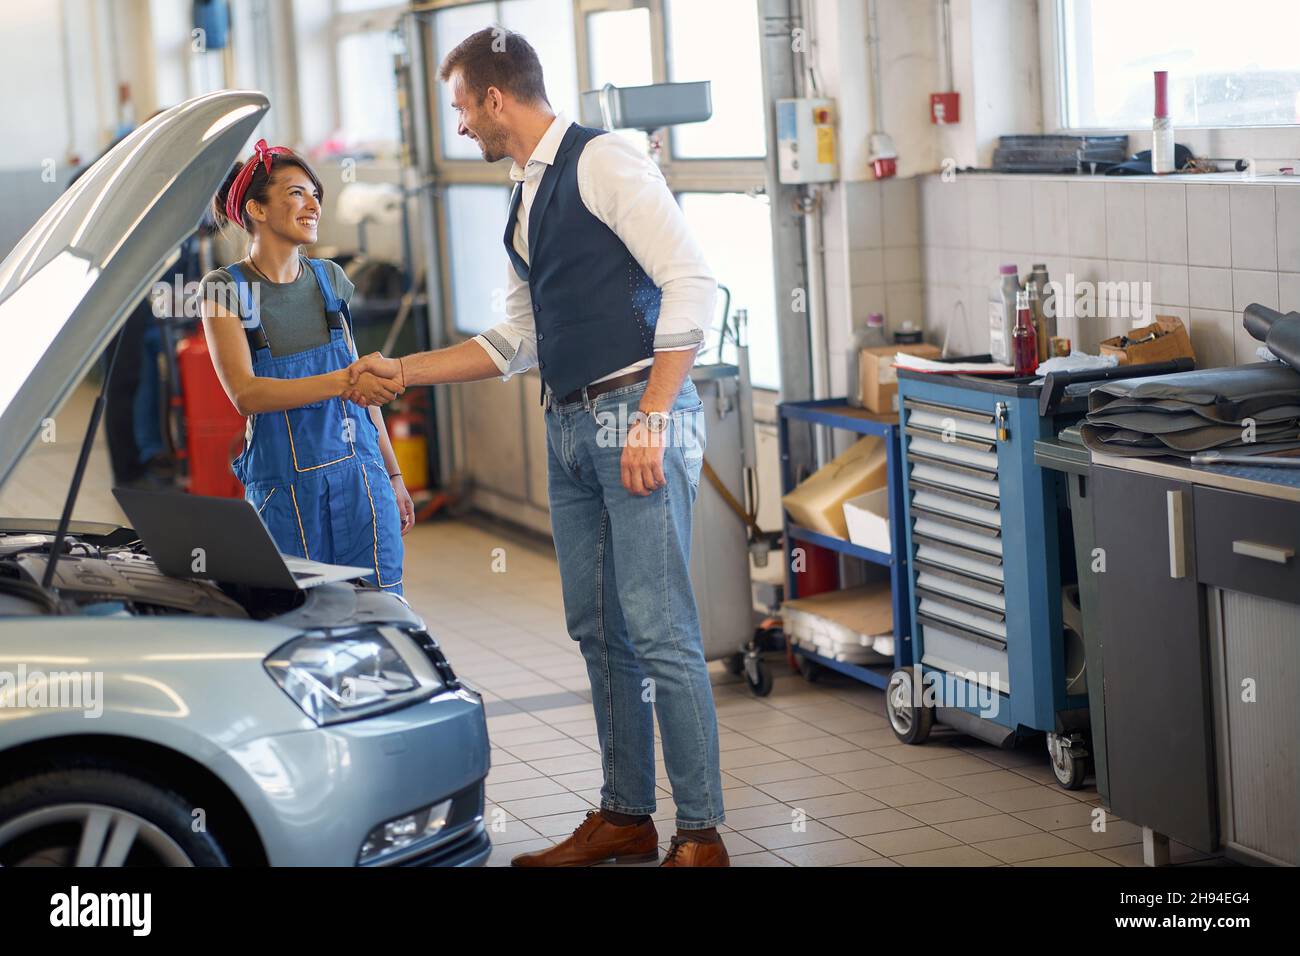 Woman mechanic communicates with the smiling client Stock Photo